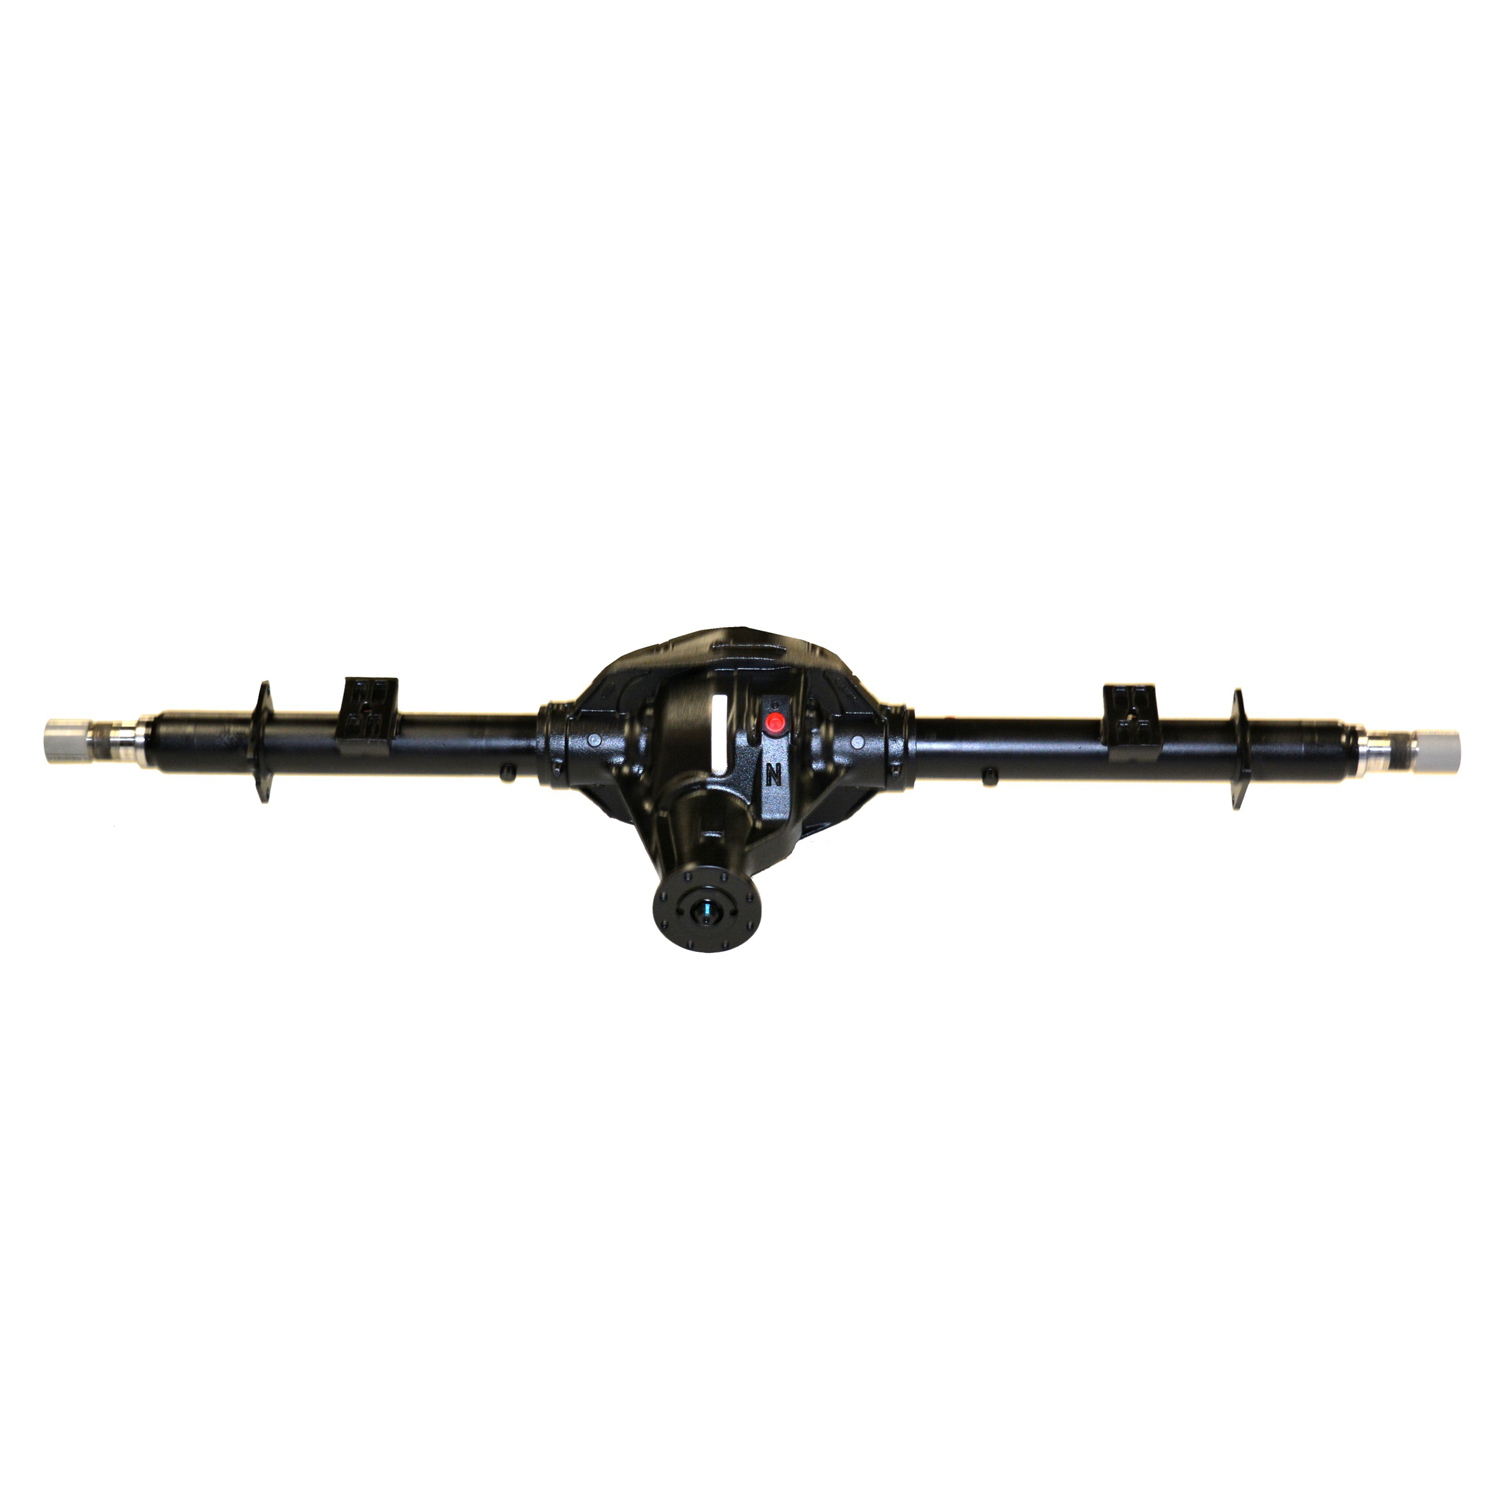 Remanufactured Axle Assy for 10.25" 87-97 F350 4.11 w/o ABS, DRW Cab Chassis, Posi LSD